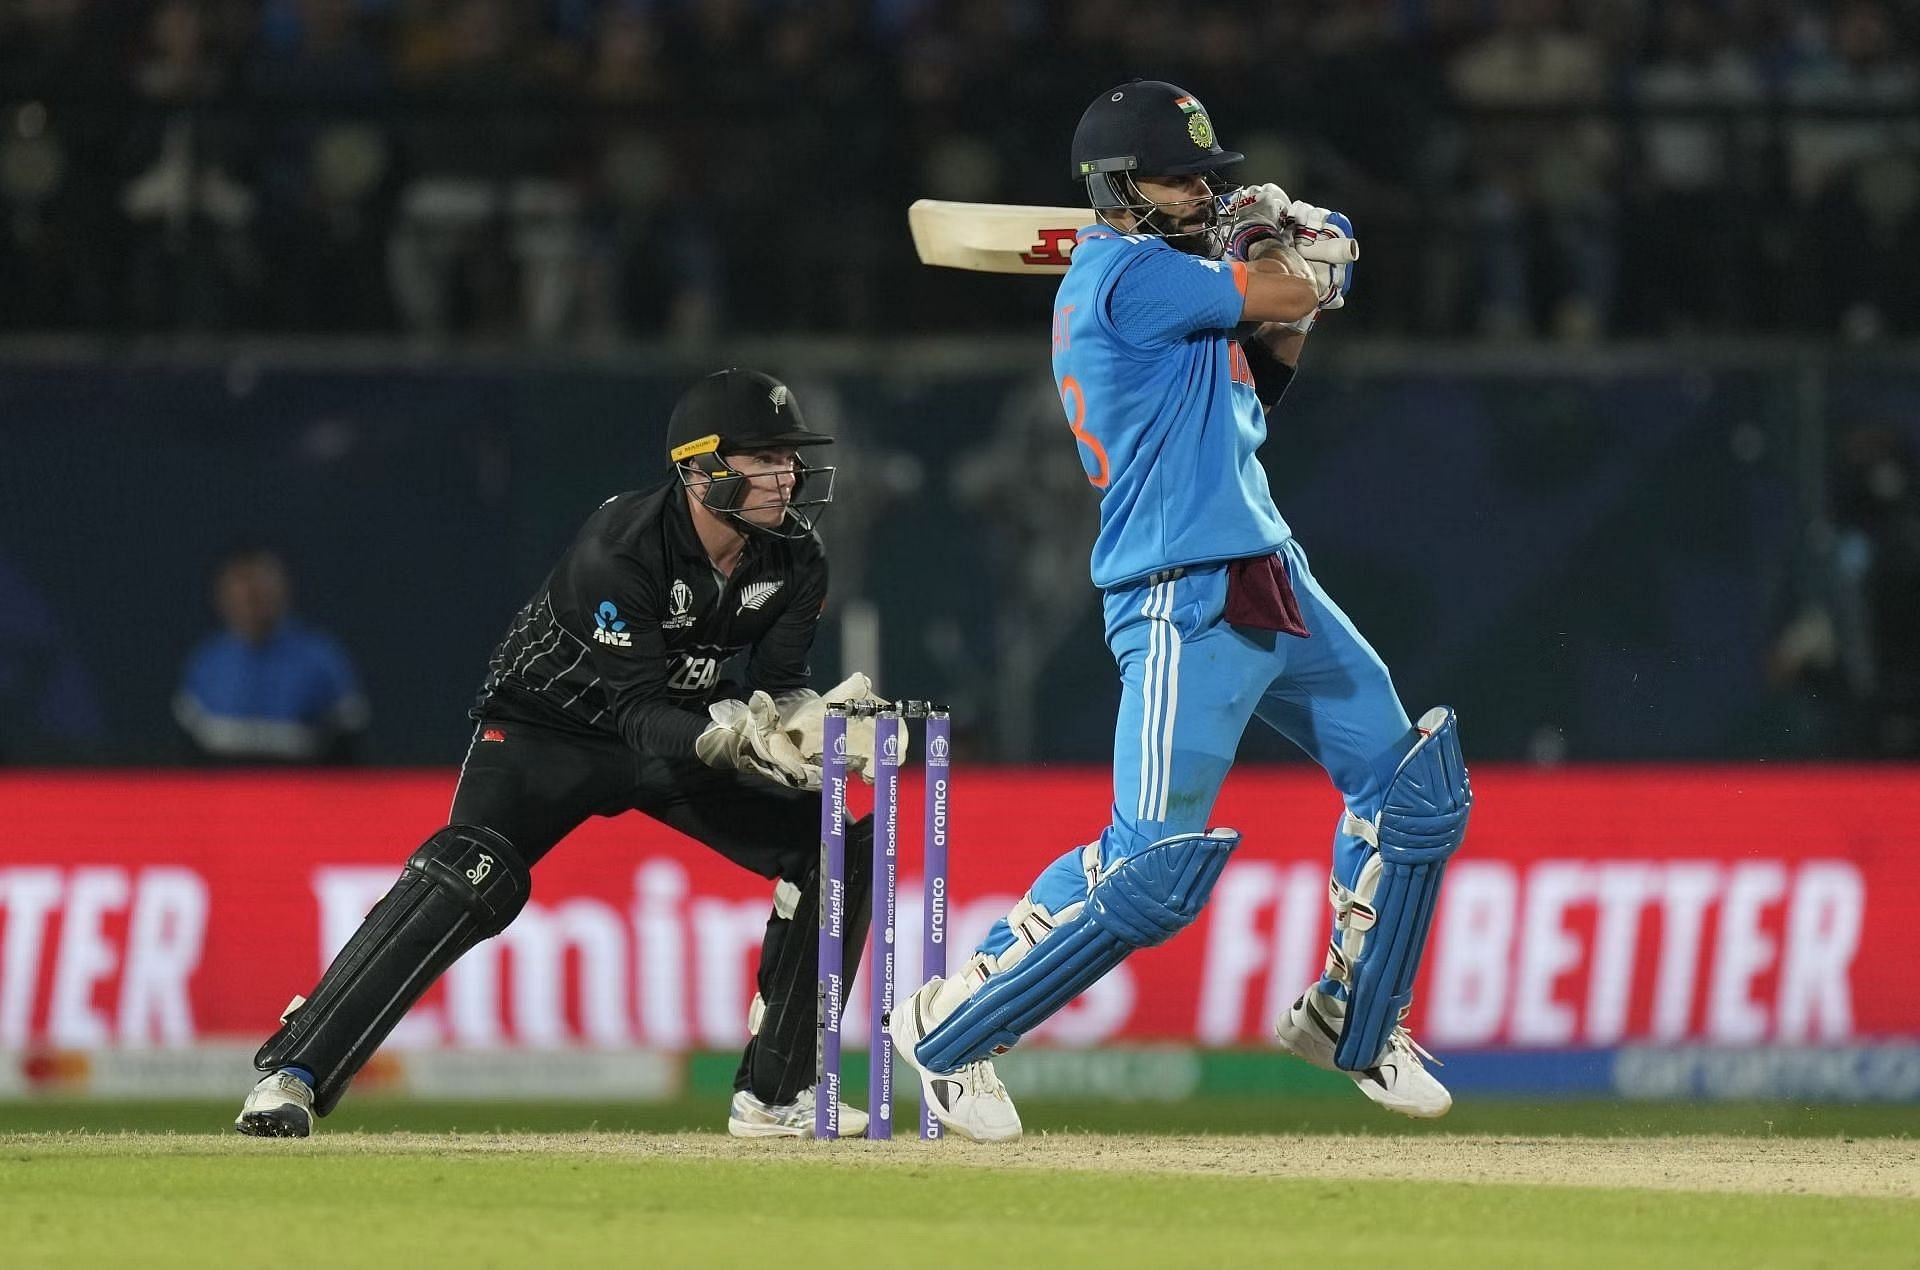 India defeated New Zealand while chasing in their league-stage clash. [P/C: AP]